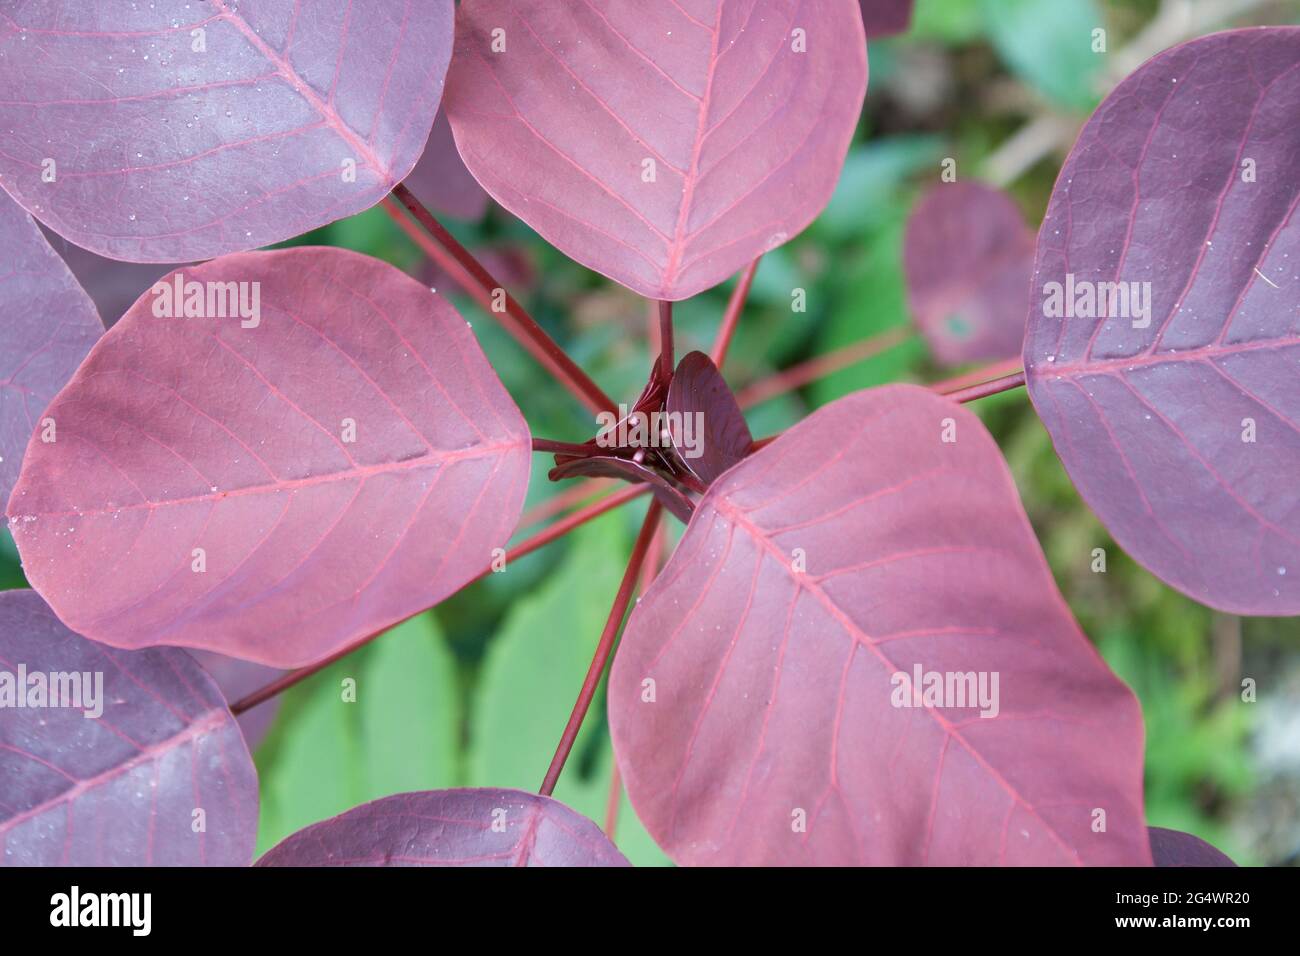 Closeup shot of Caribbean Copper plant leaves on a blurred background Stock Photo